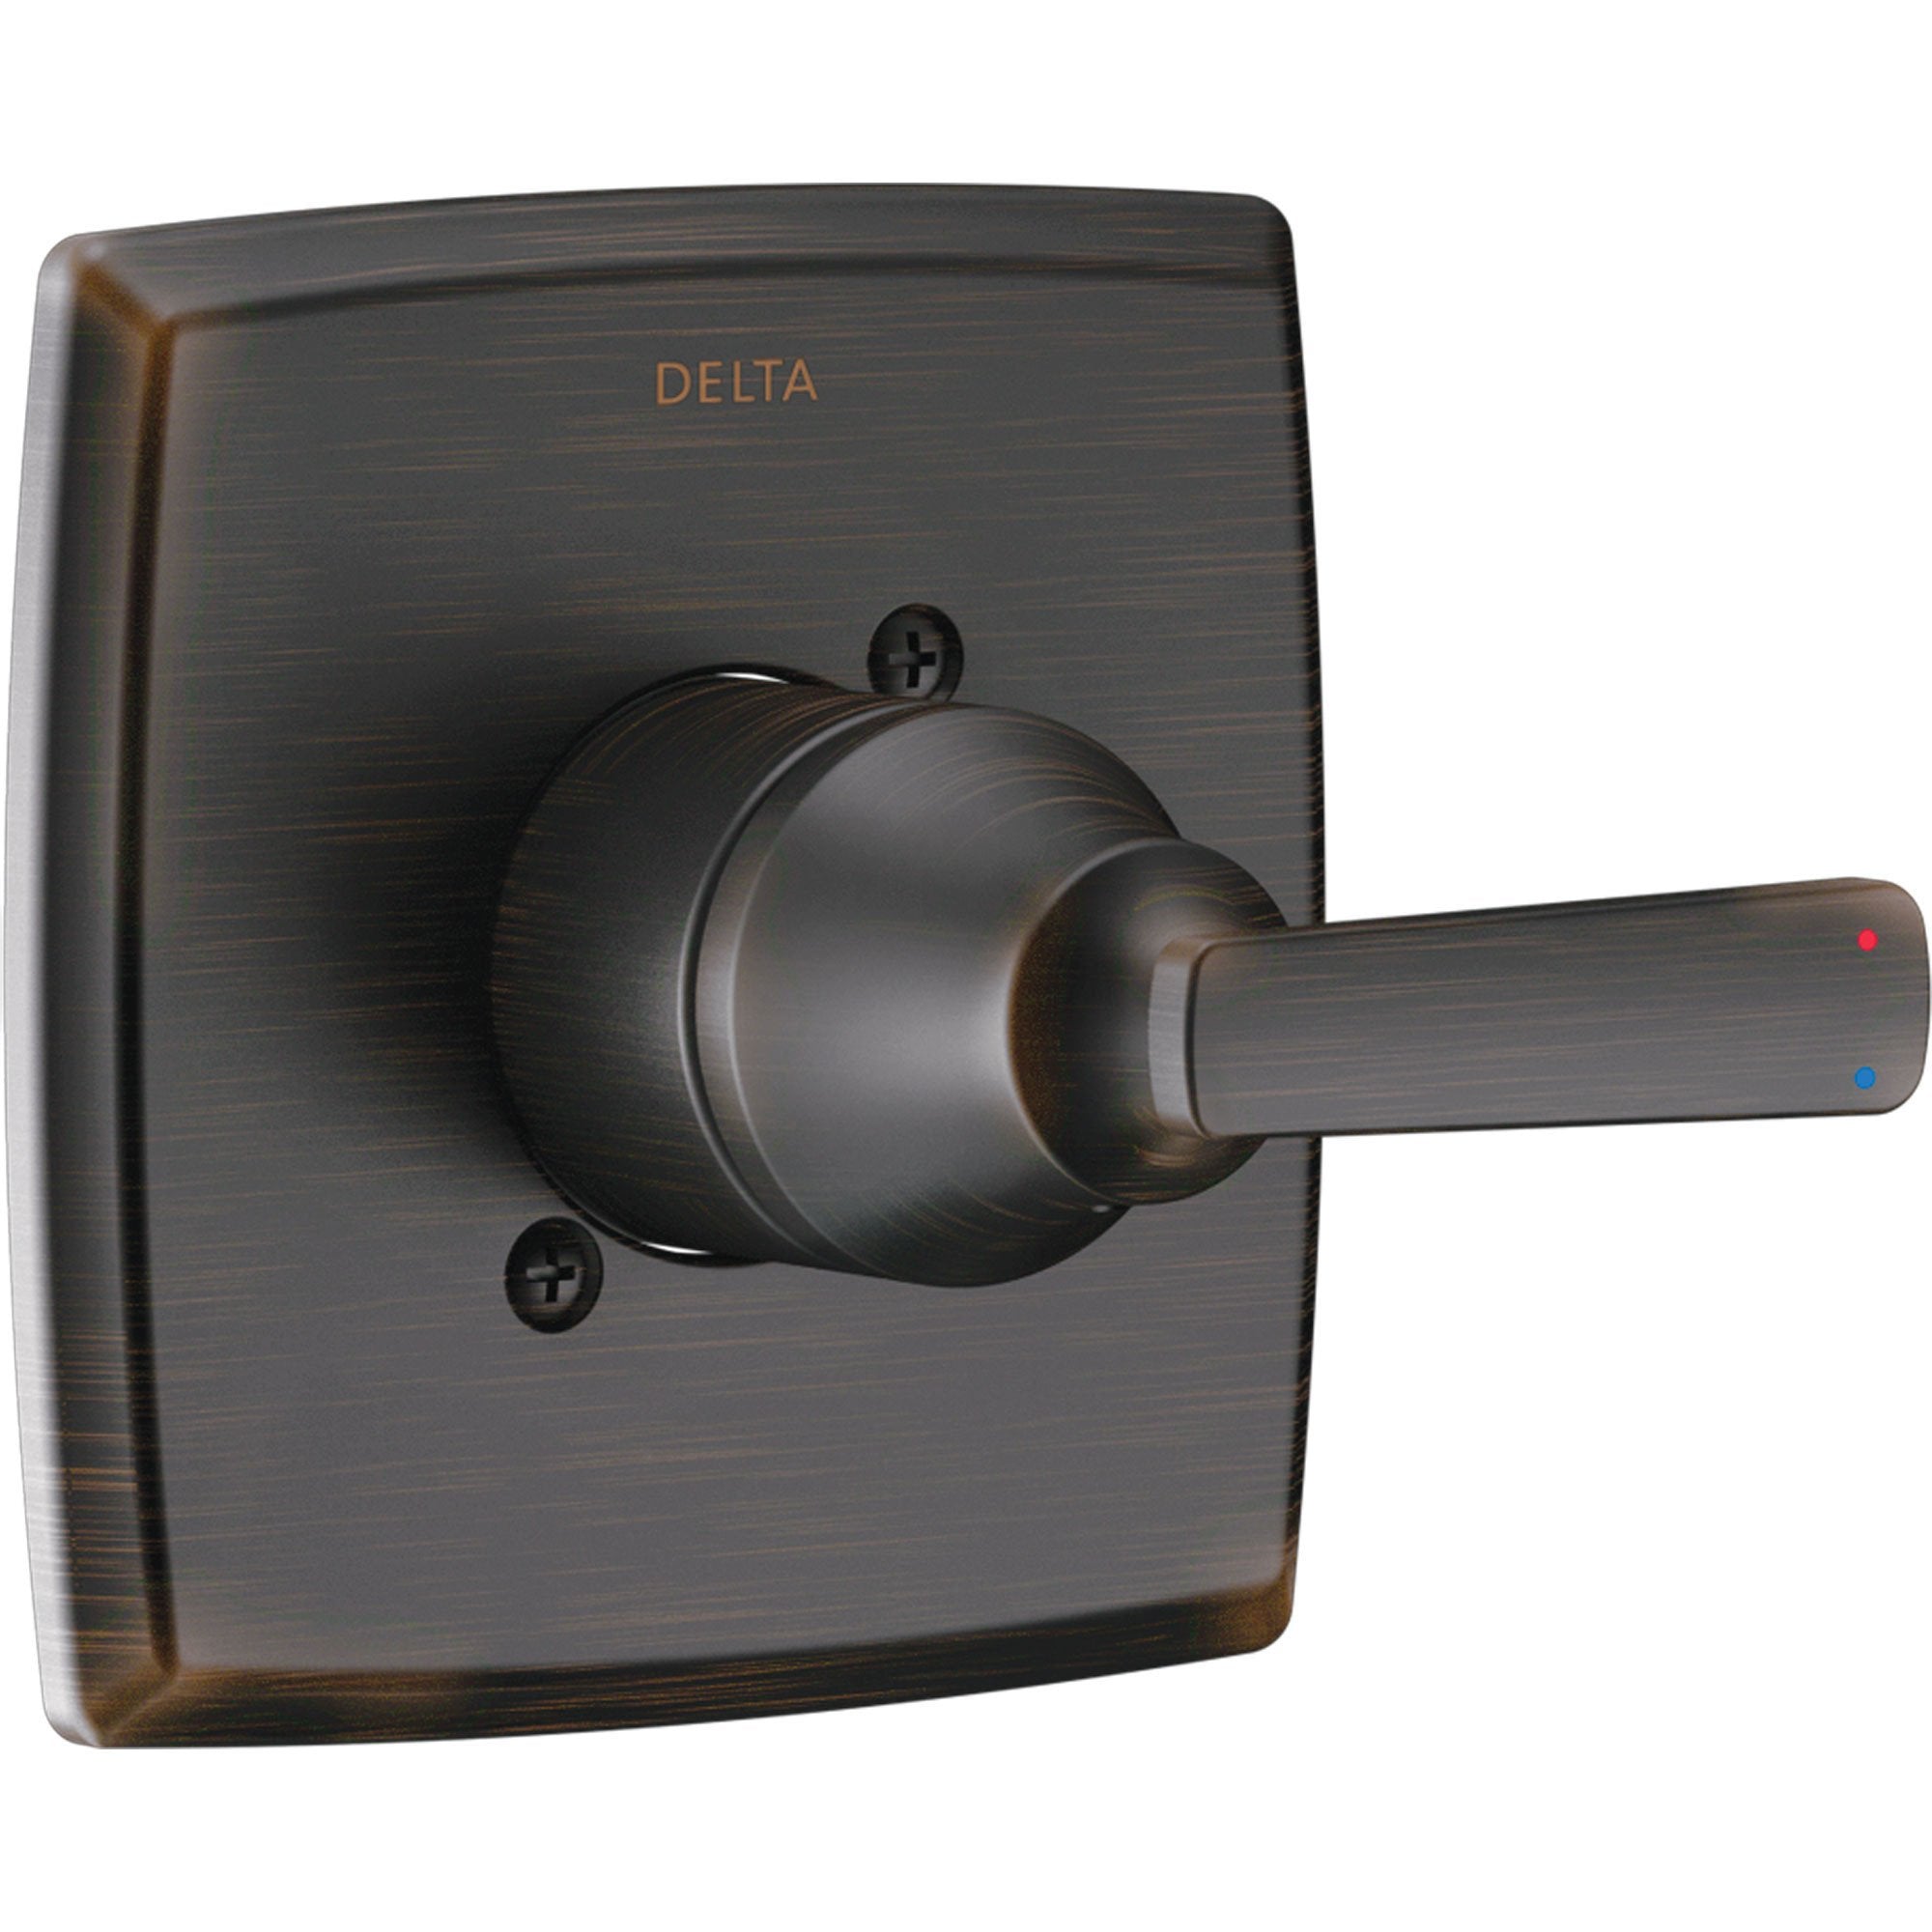 Delta Ashlyn 14 Series Modern Venetian Bronze Finish Single Handle Pressure Balanced Shower Faucet Control INCLUDES Rough-in Valve with Stops D1259V